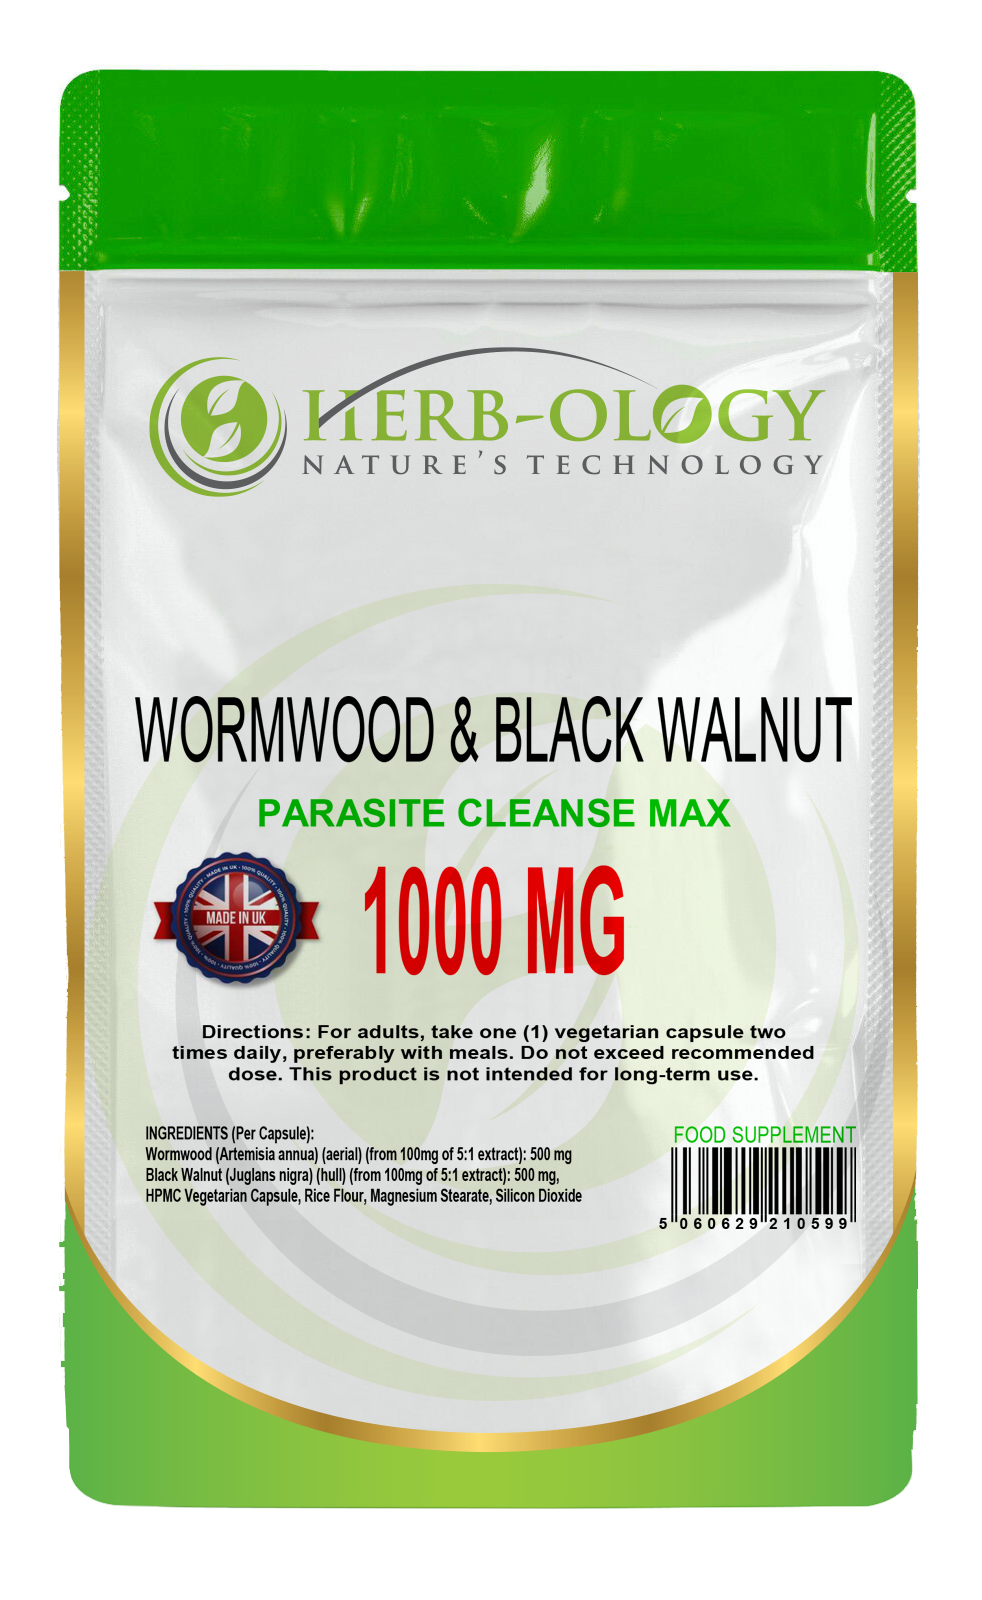 Wormwood & Black Walnut Complex 1000mg Vegan Capsules For Parasite Cleanse